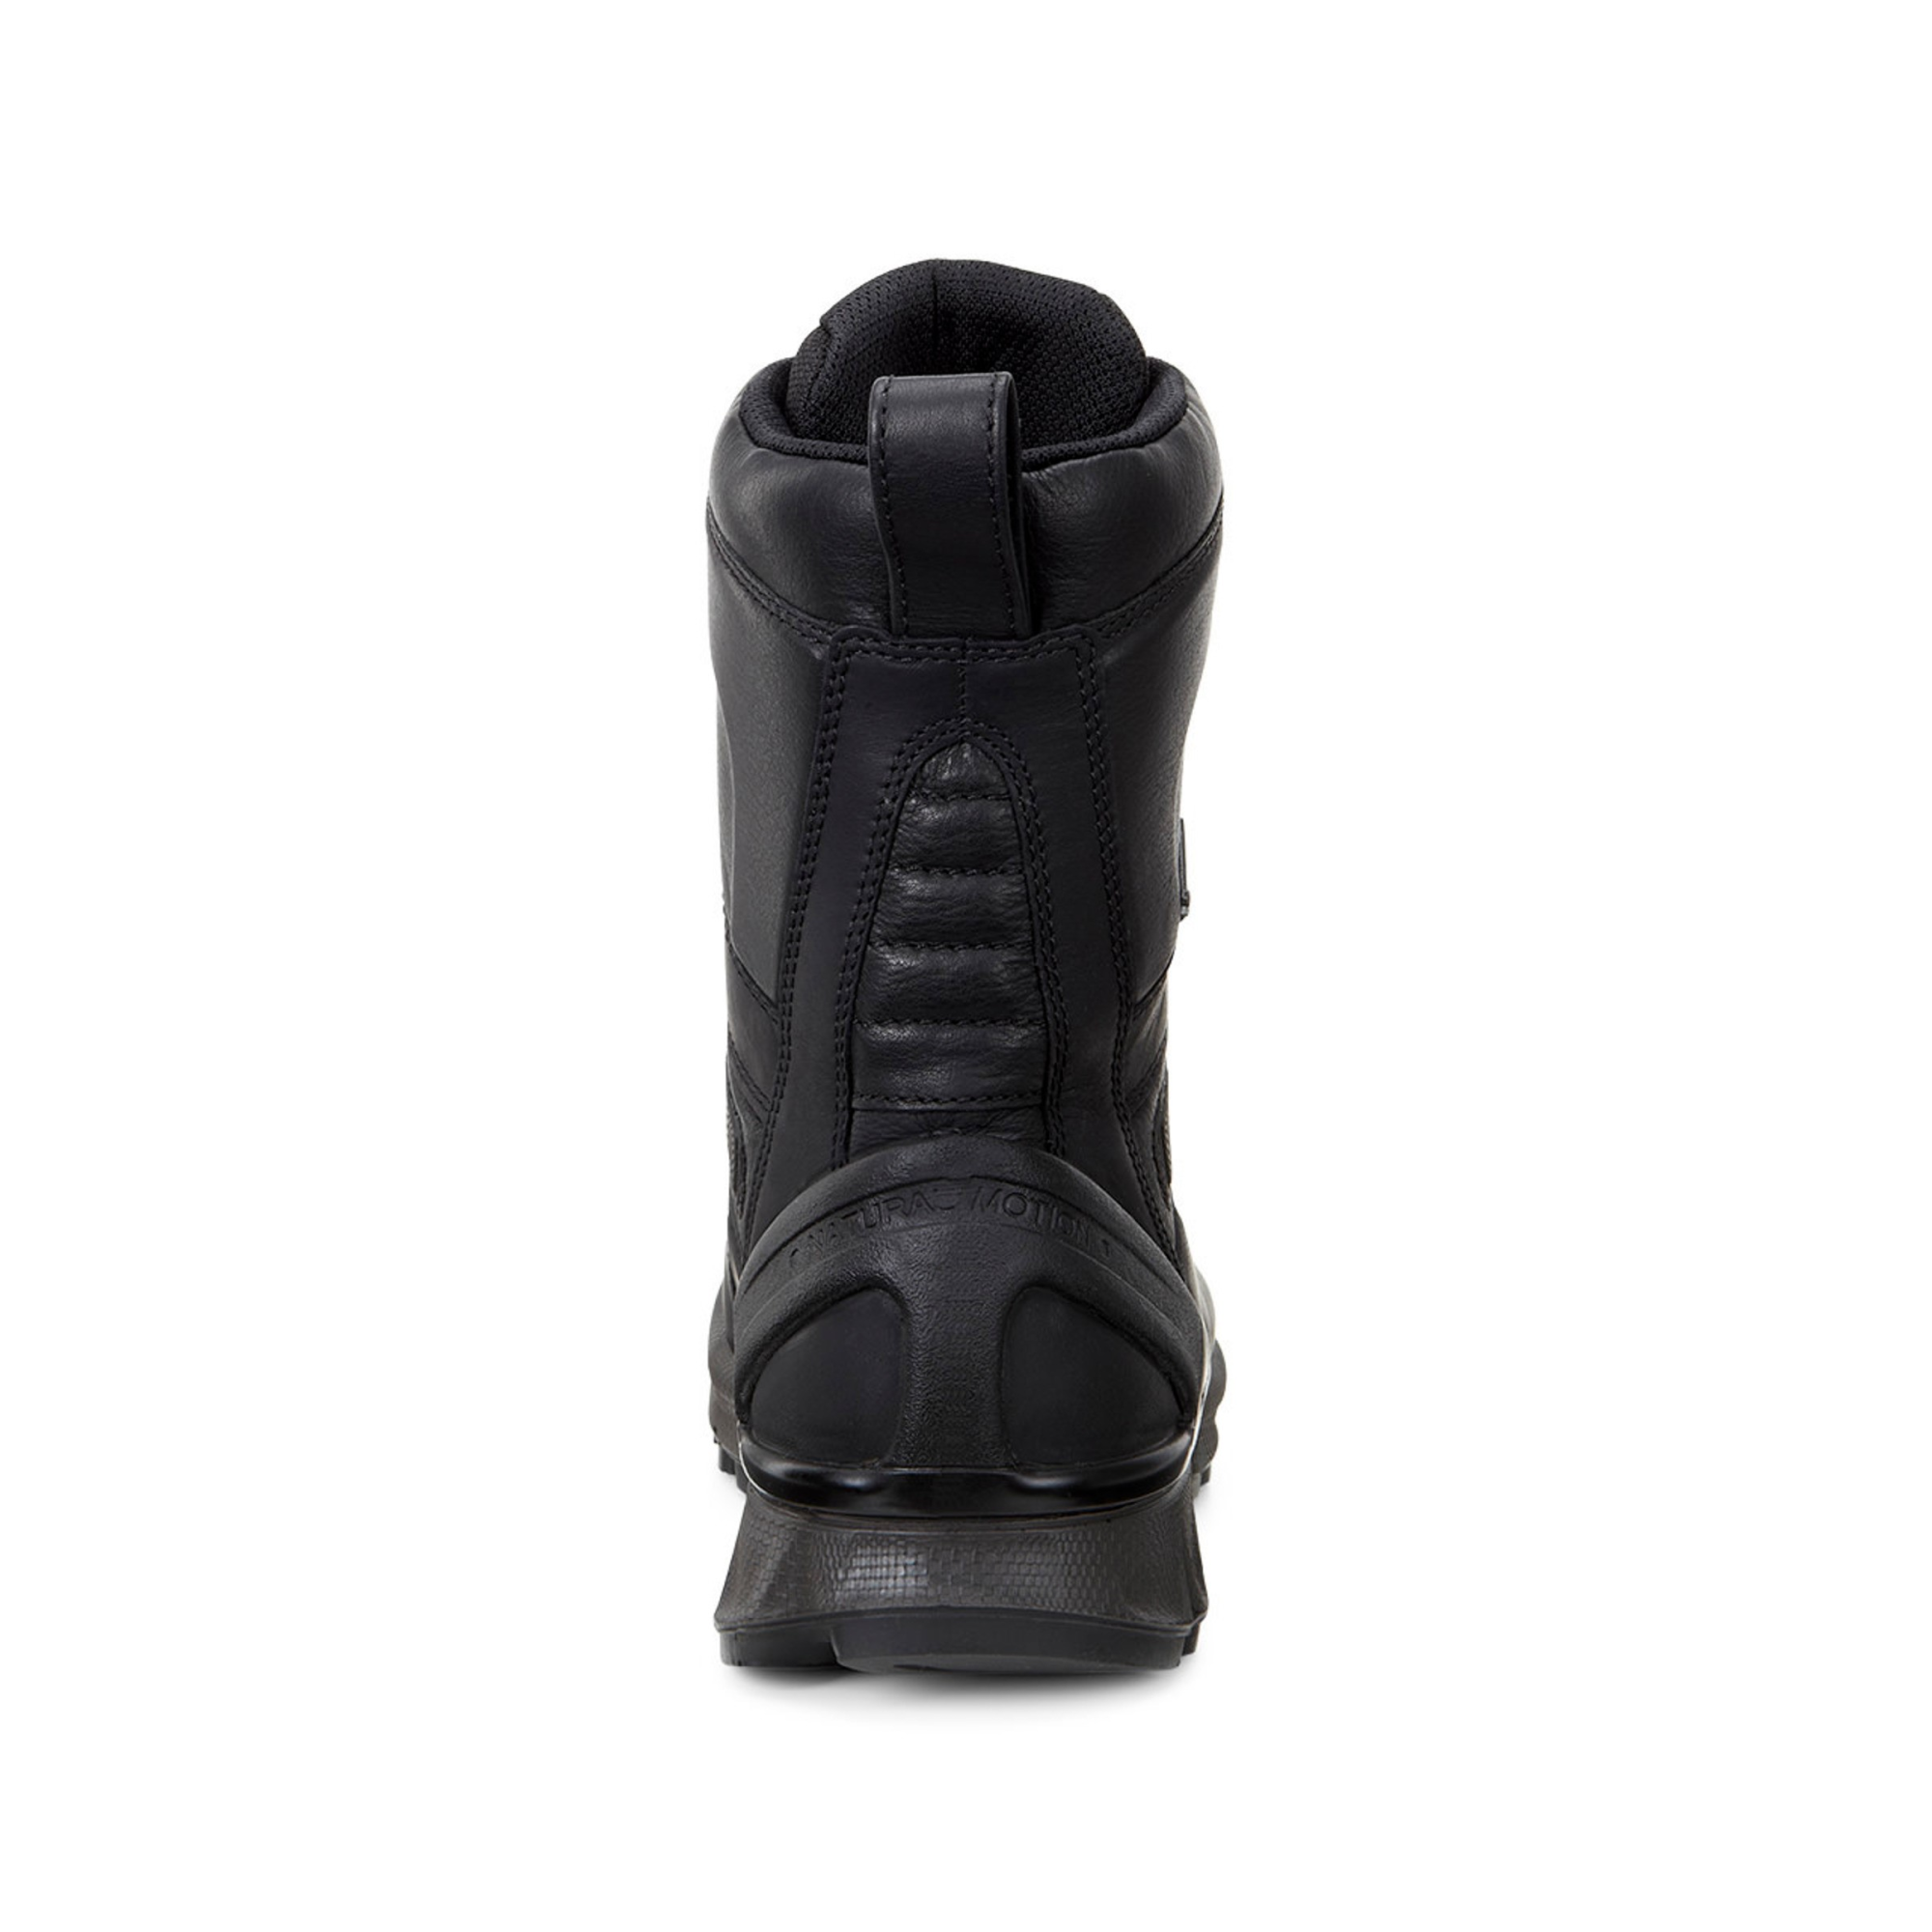 Mens BIOM Hike GTX 1.7 40 - Products - Veryk Mall Veryk many product, quick response, safe your money!